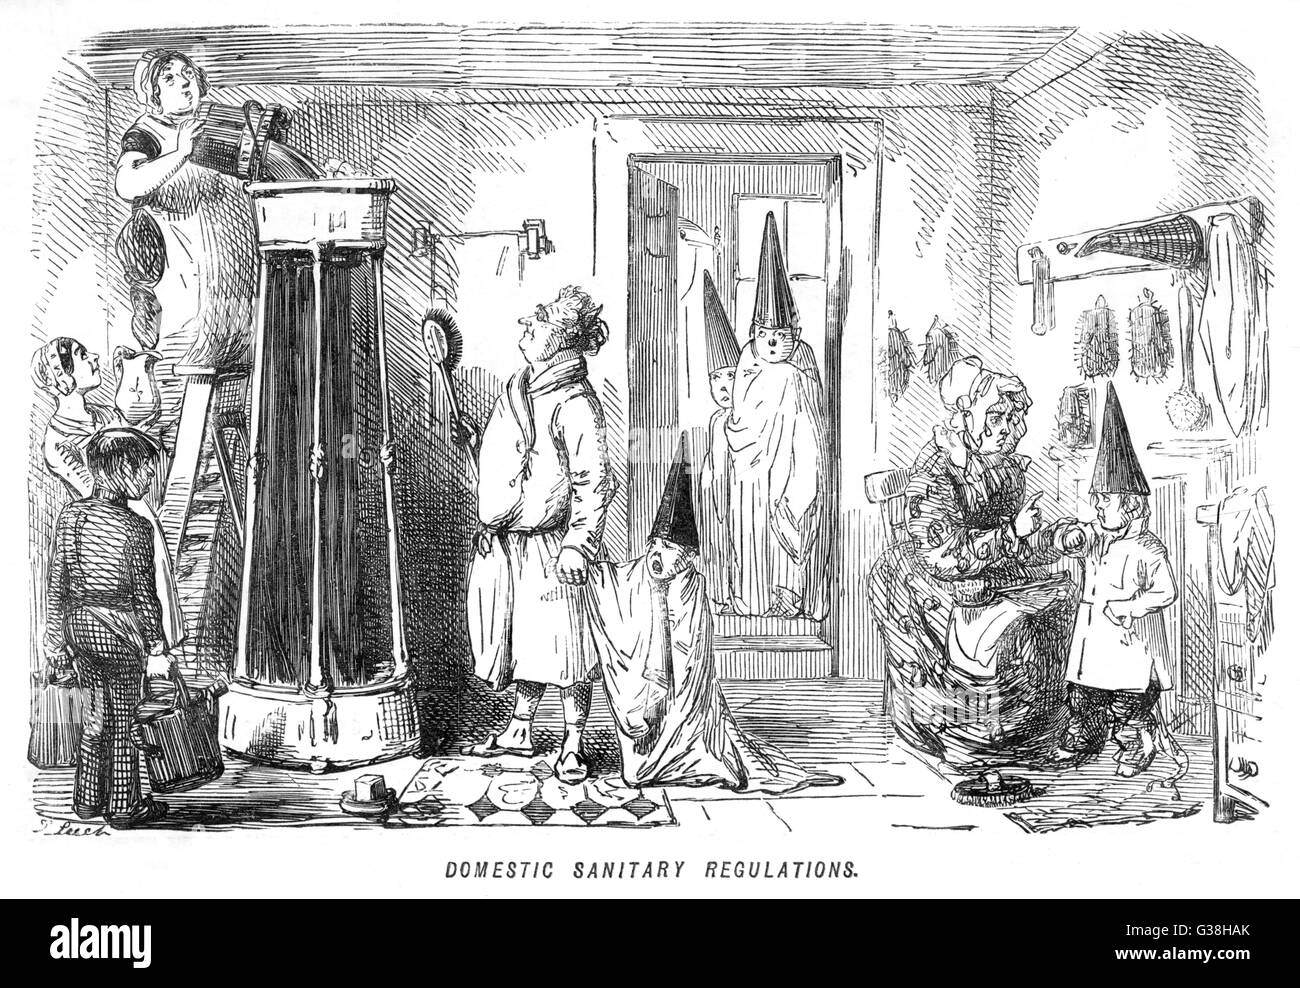 A family prepare to partake of  a shower.  The servants fill  up the shower head with hot  water as the family members  don conical hats and towels -  some require encouragement!     Date: 1850 Stock Photo